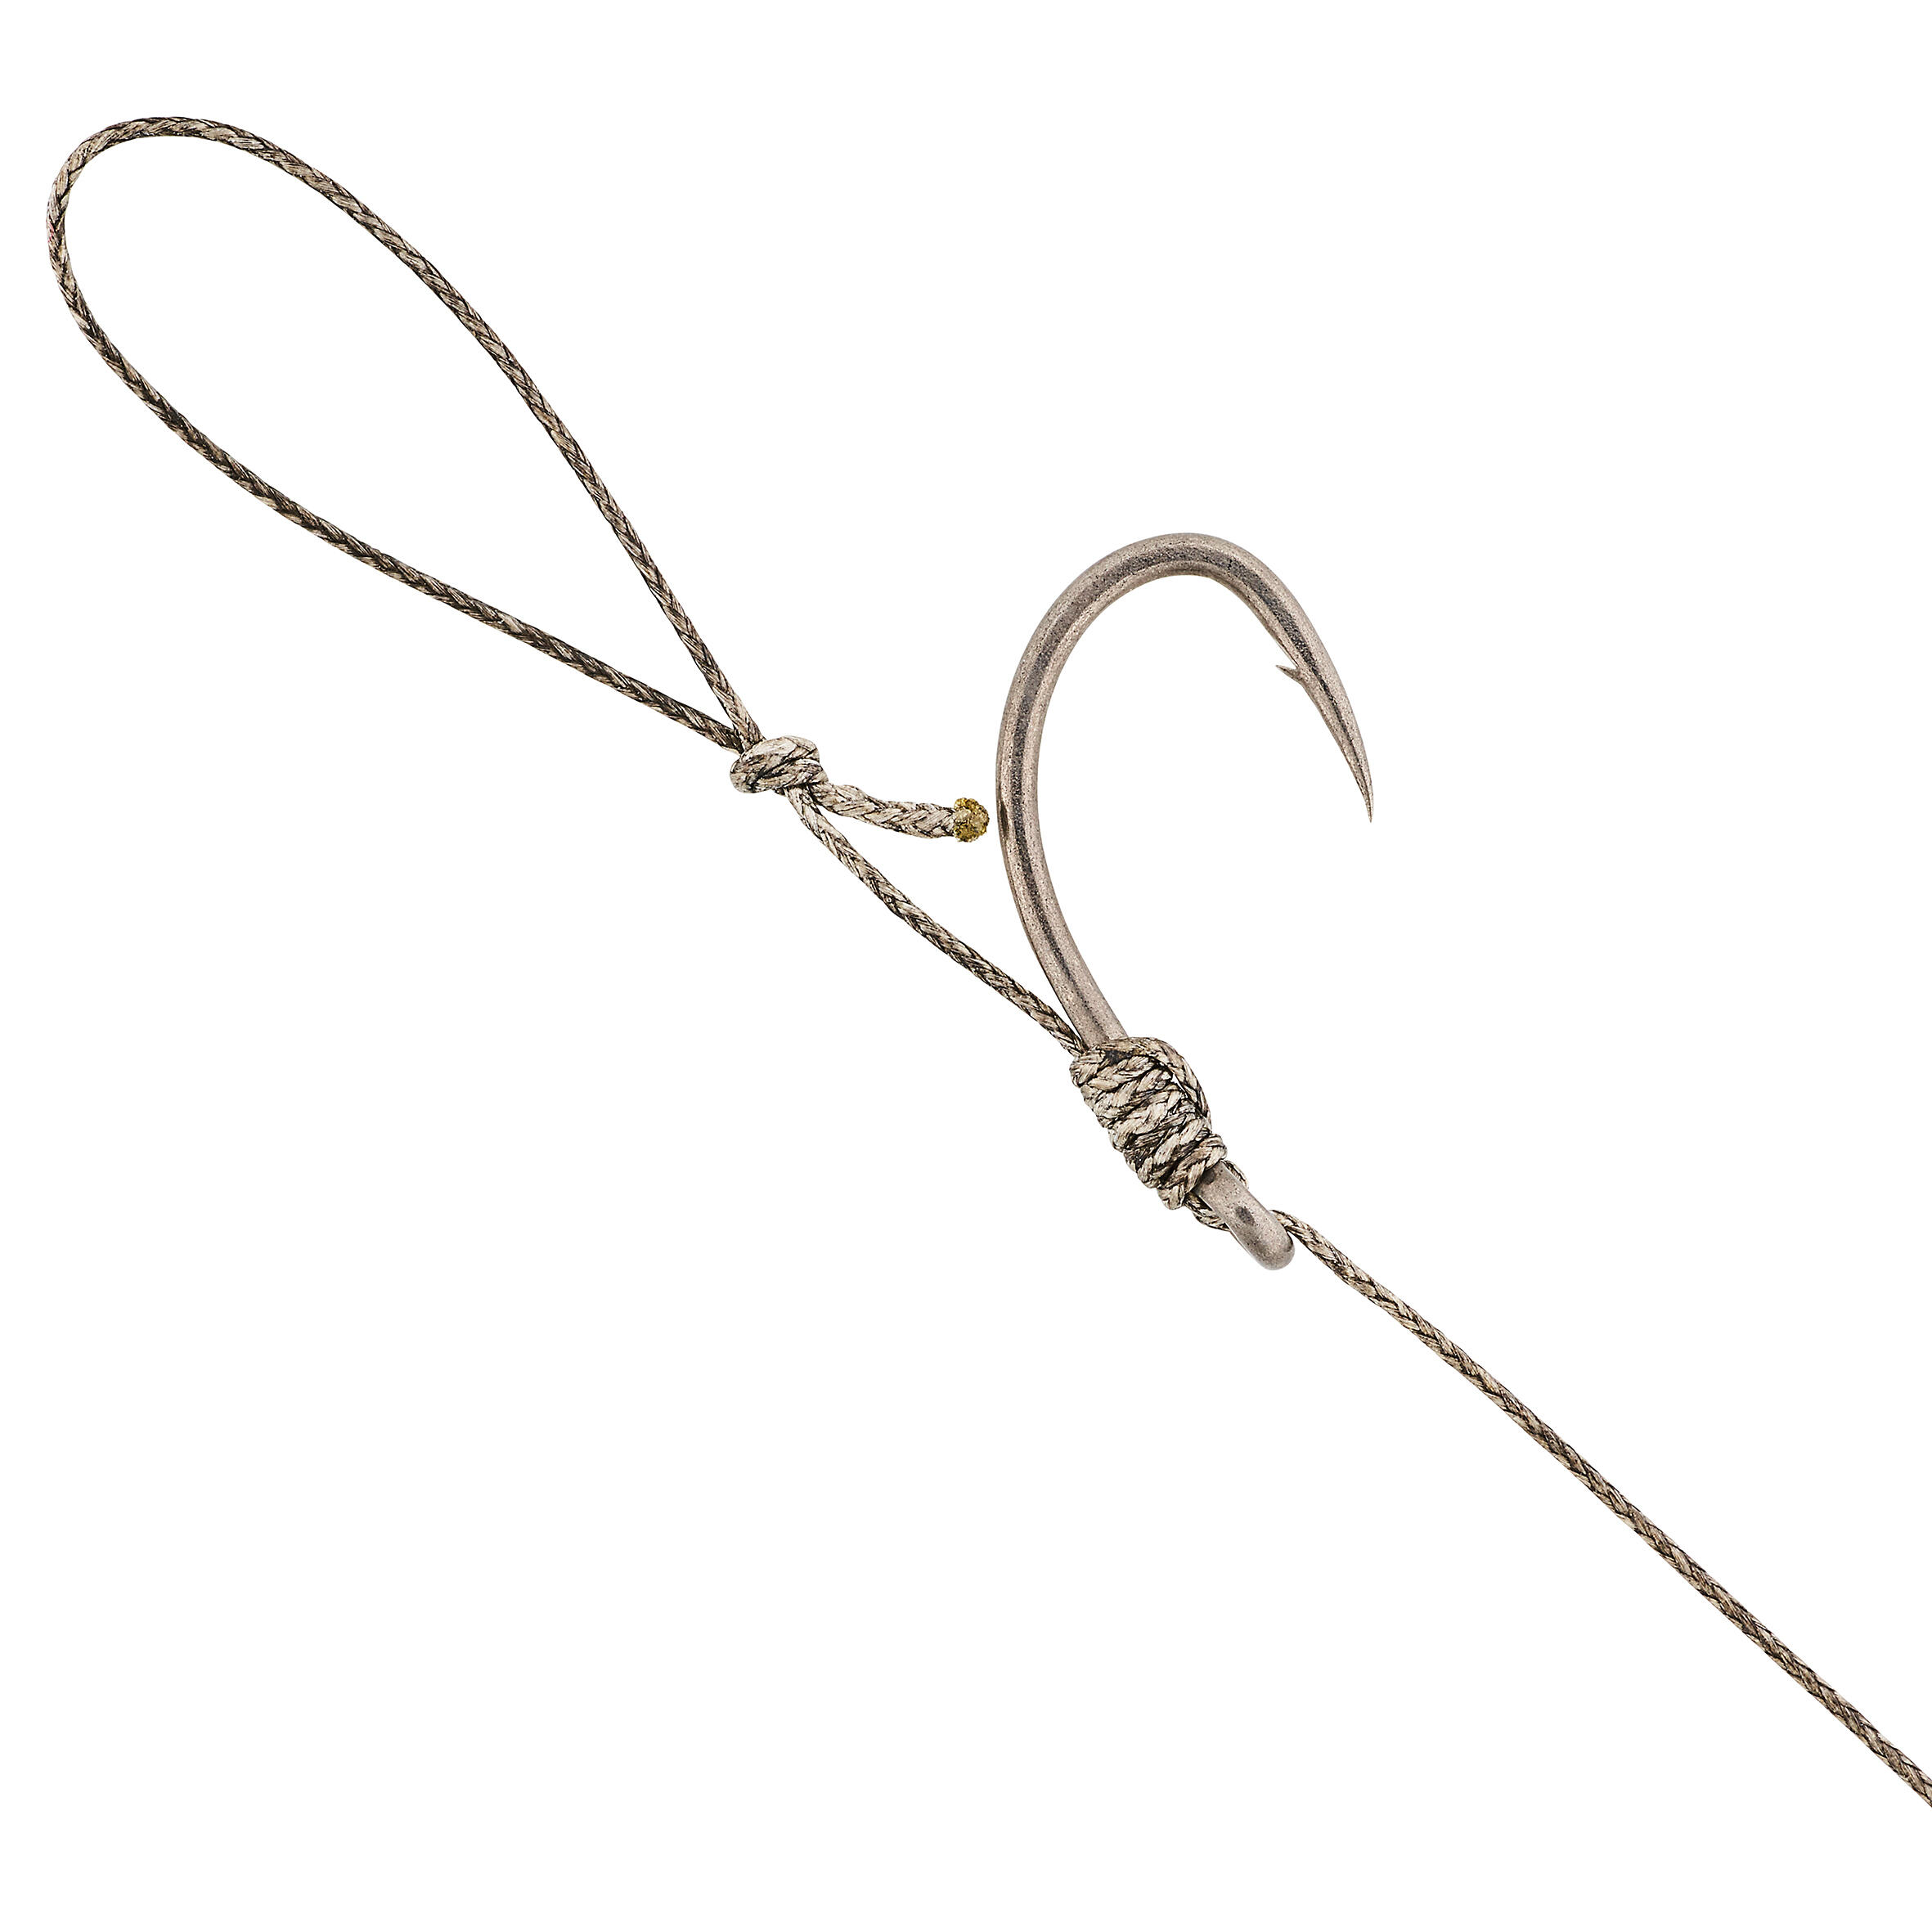 SN Hook 100 rigged leader for Carp fishing 2/3